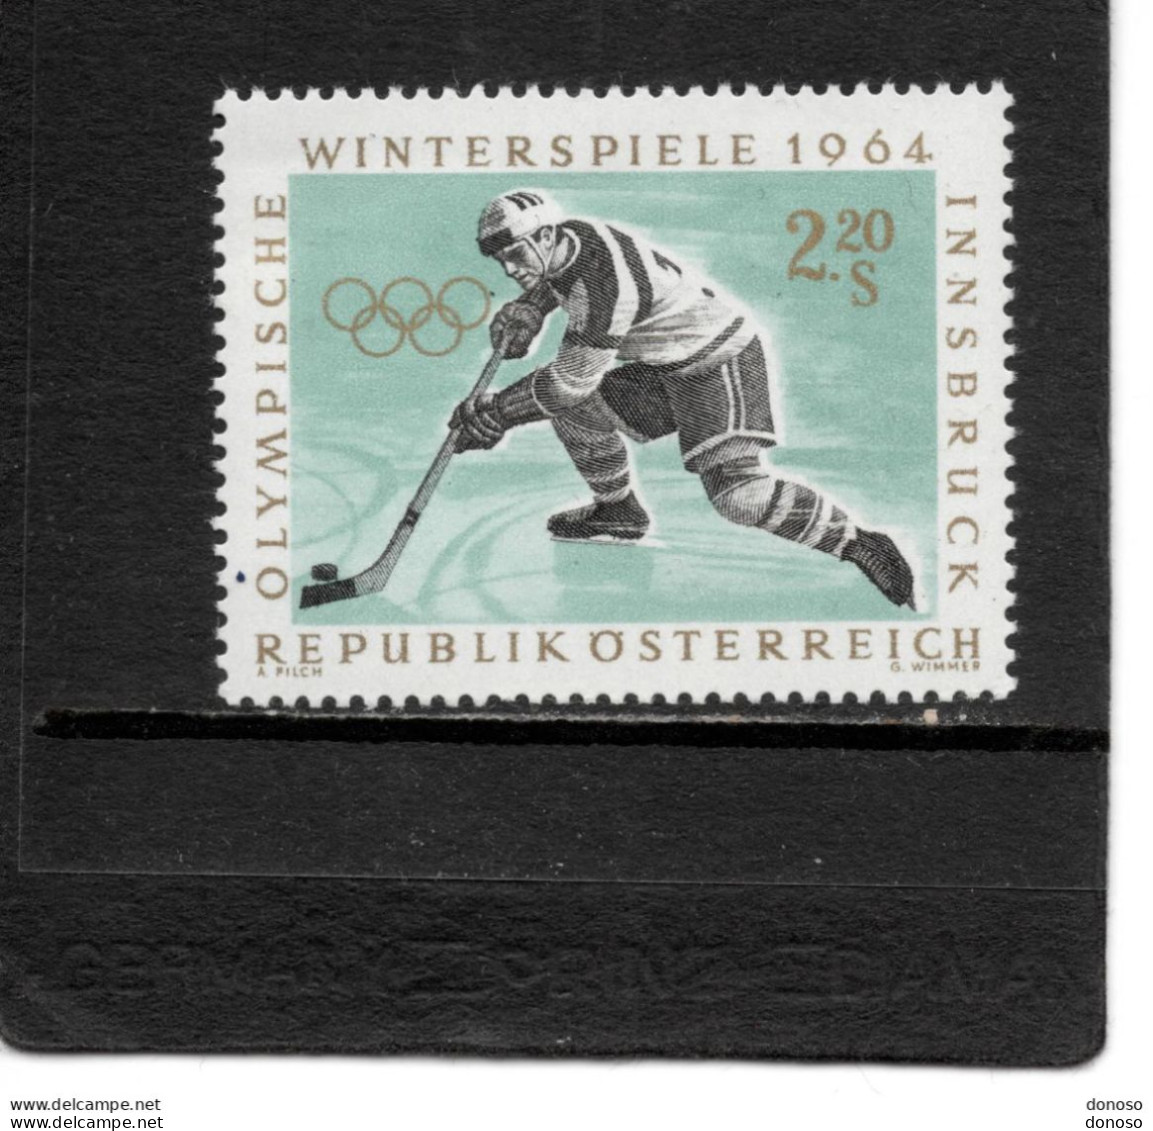 AUTRICHE 1963 HOCKEY SUR GLACE Yvert 978 NEUF** MNH - Unused Stamps